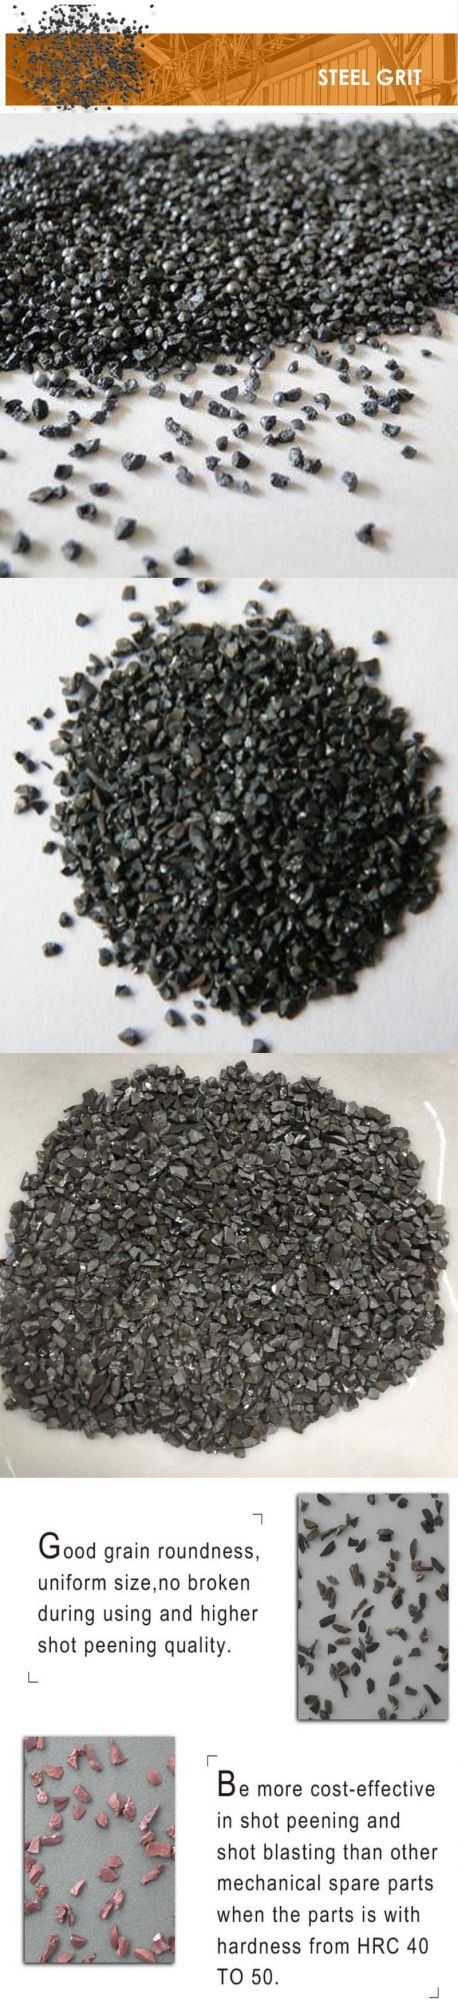 High Quality Cast Steel Grit G80 for Surface Treatment